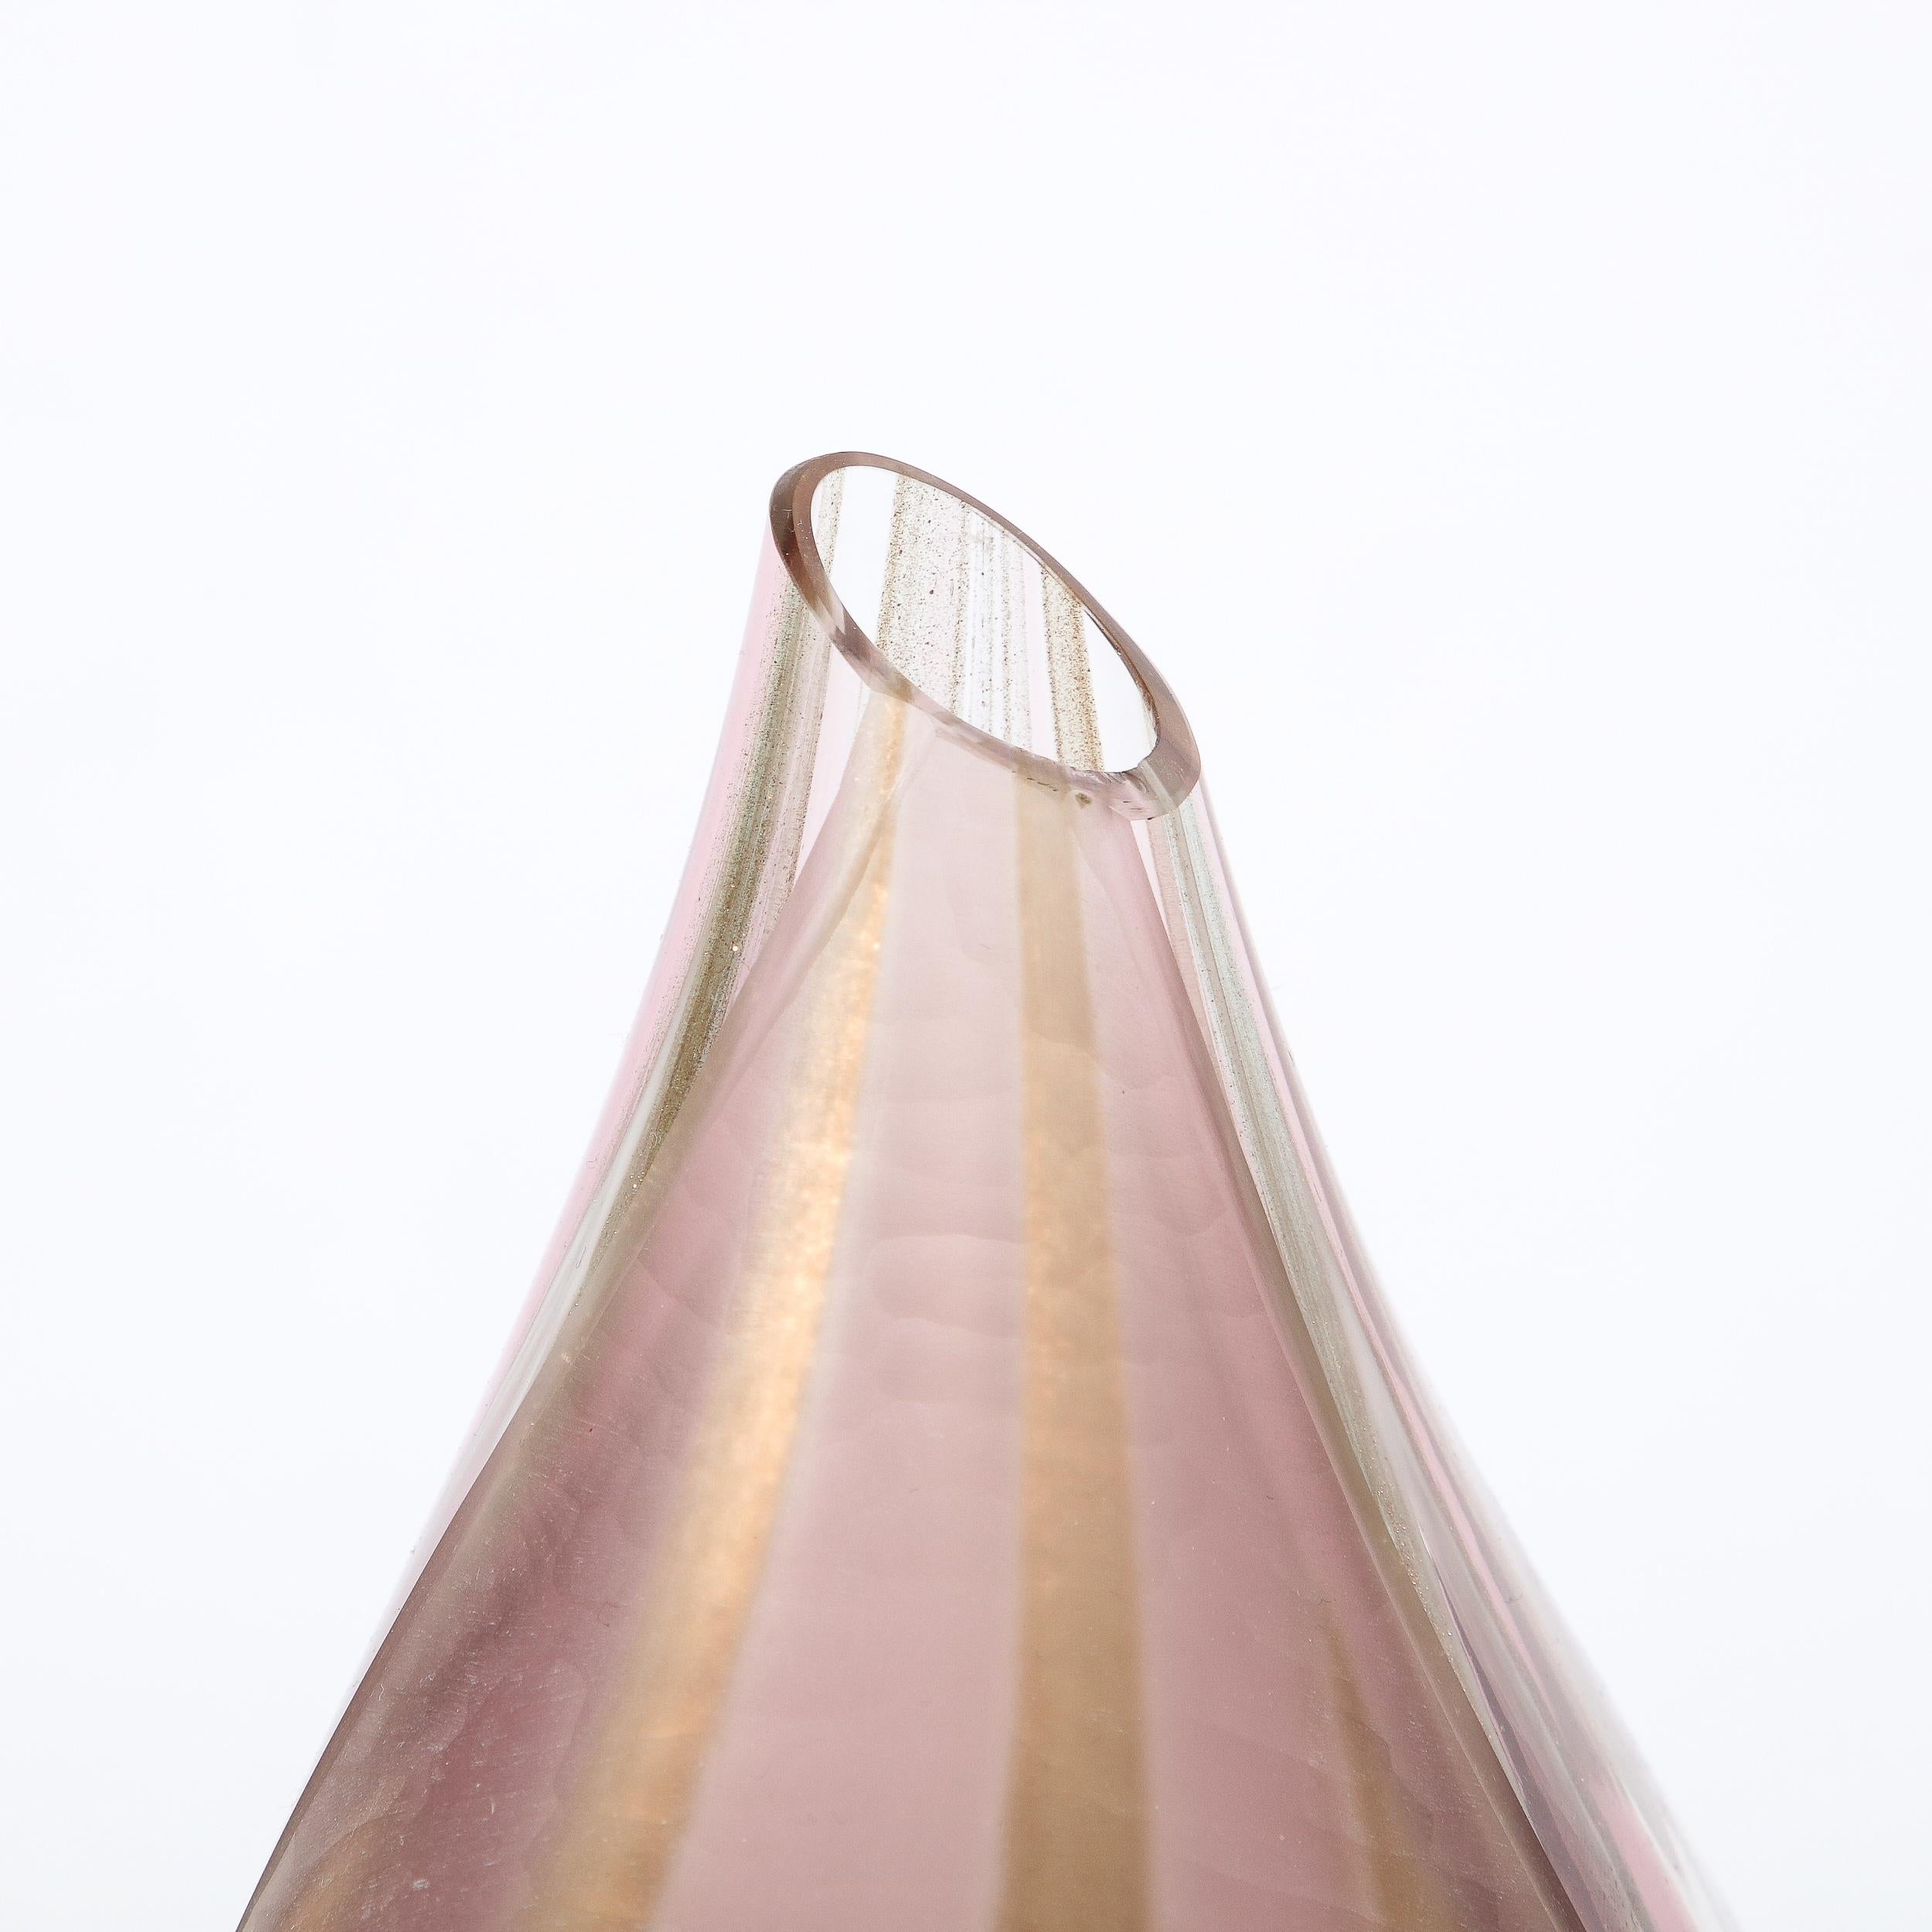 Late 20th Century Mid-Century Hand-Blown Amethyst Murano Glass Vase w/ 24K Rose Gold Striations For Sale